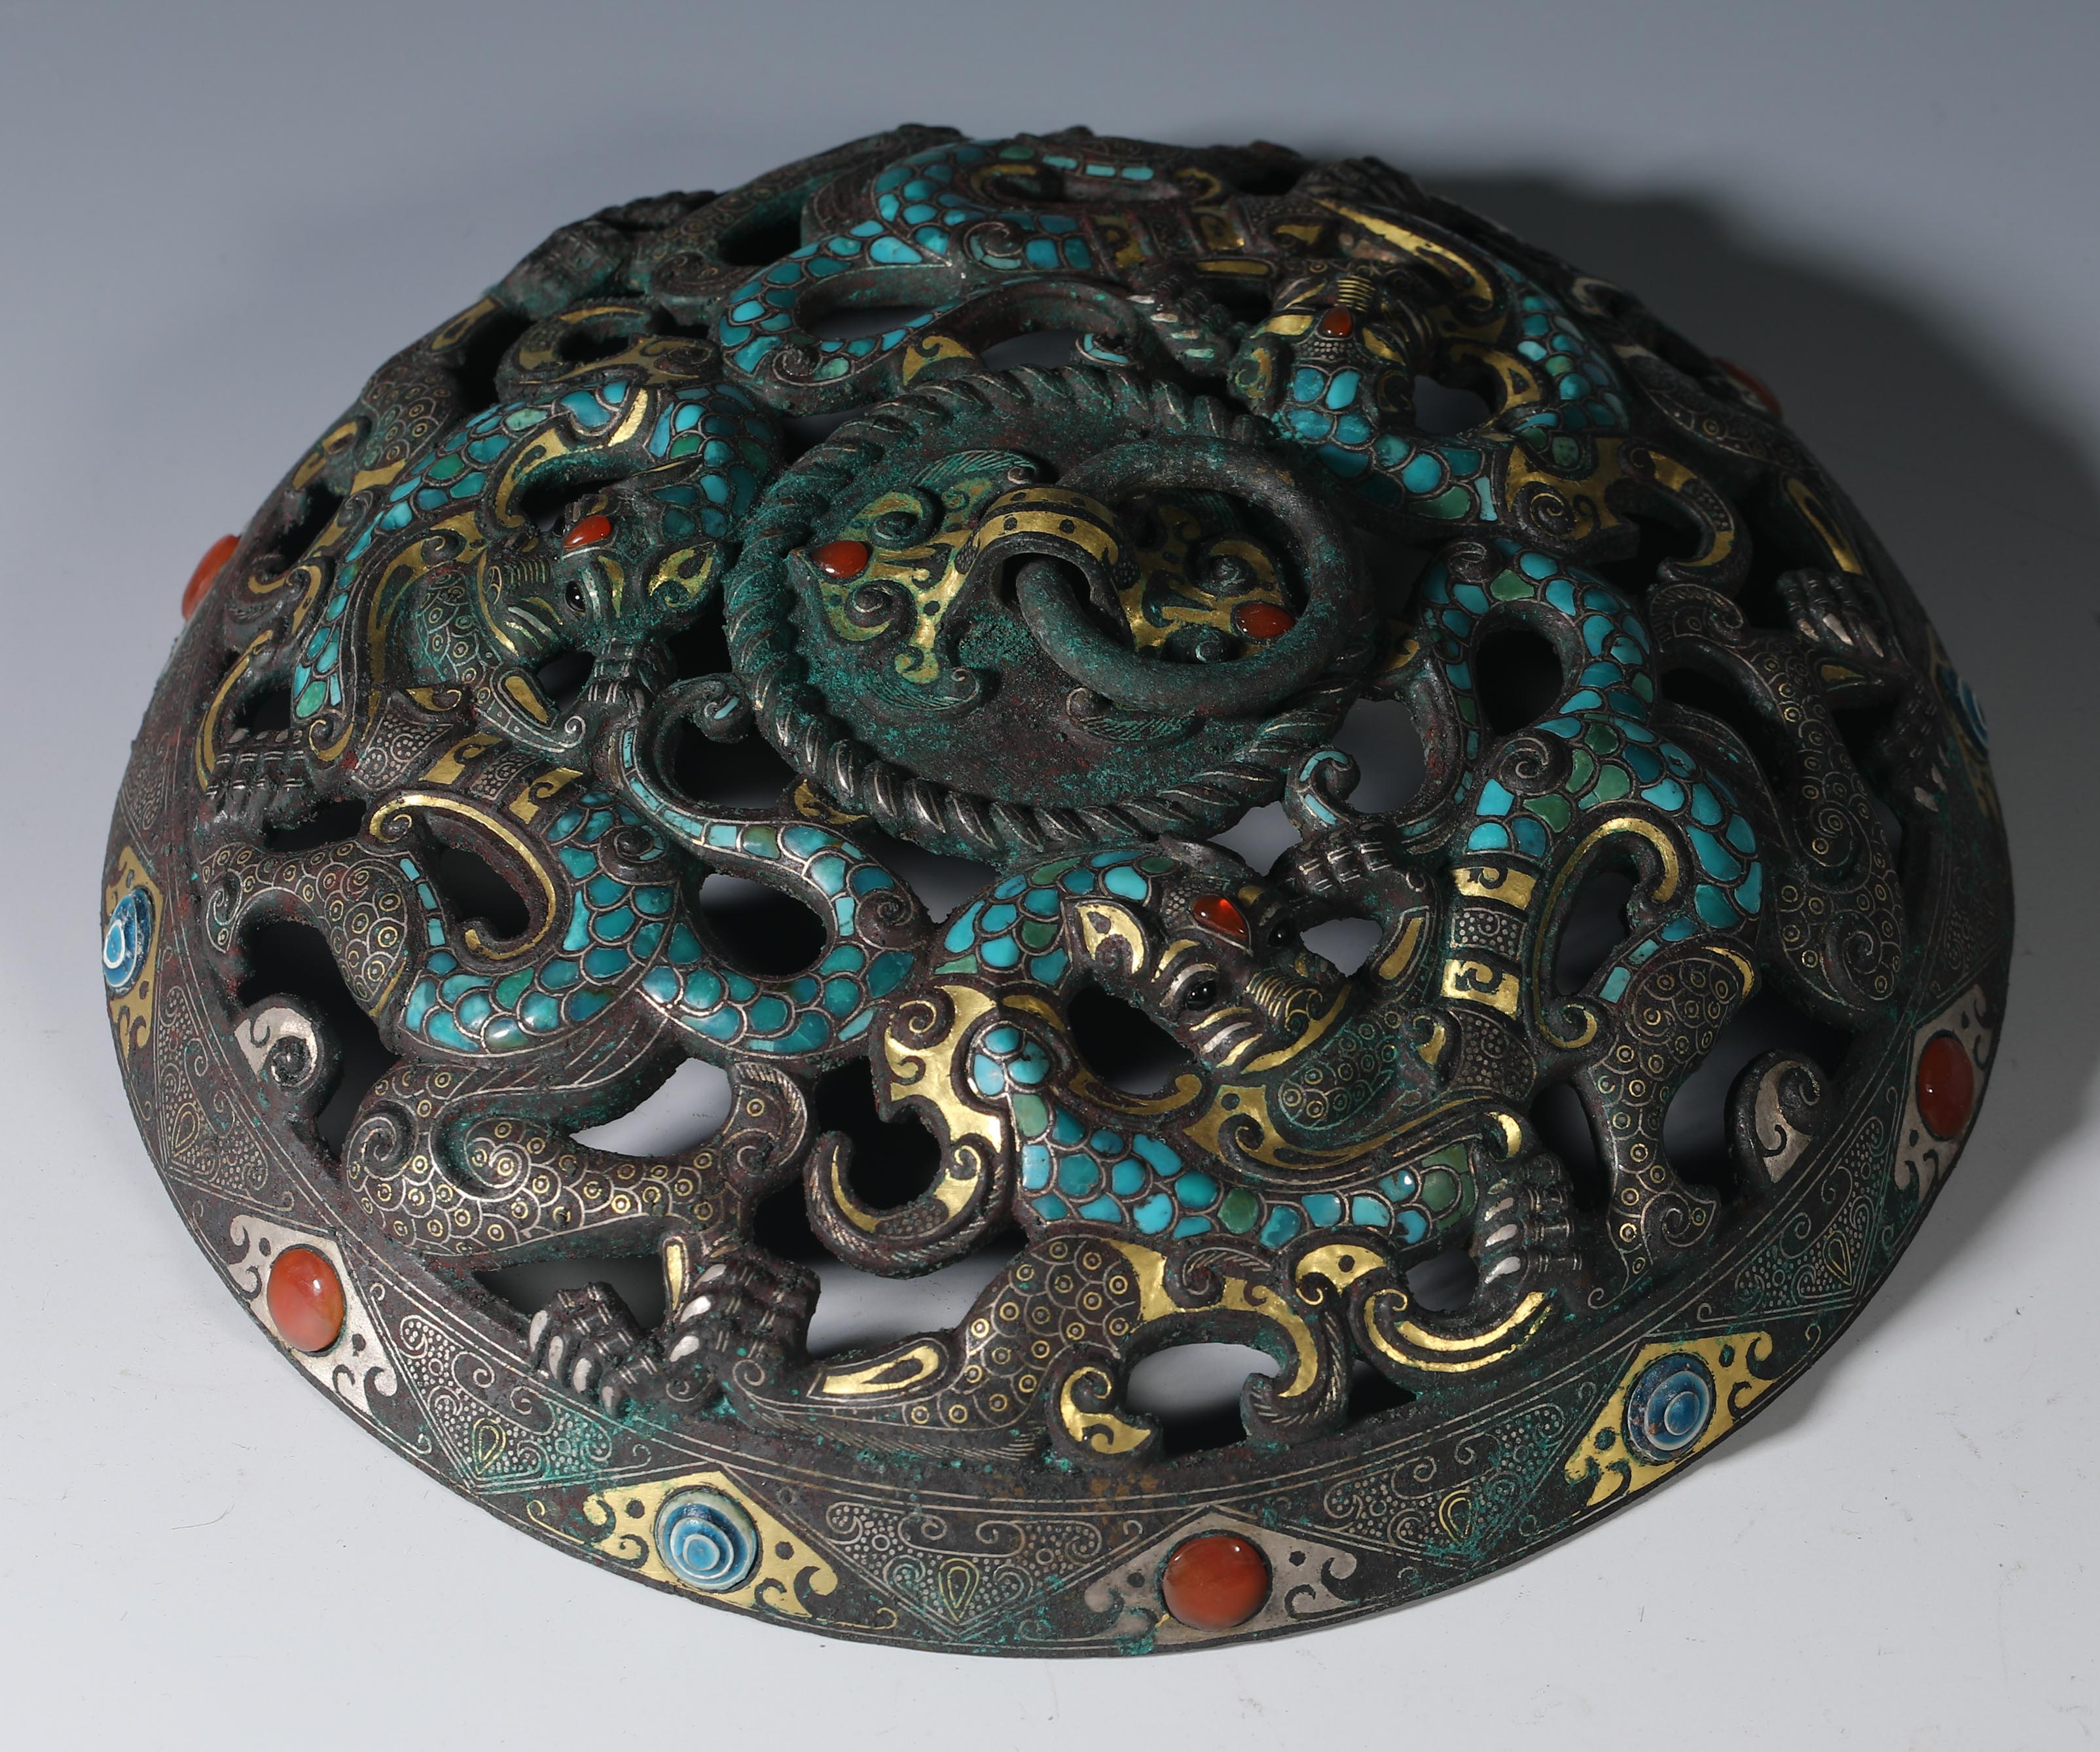 Gilded bronze and gold incense burner from the Han dynasty   - Image 8 of 11